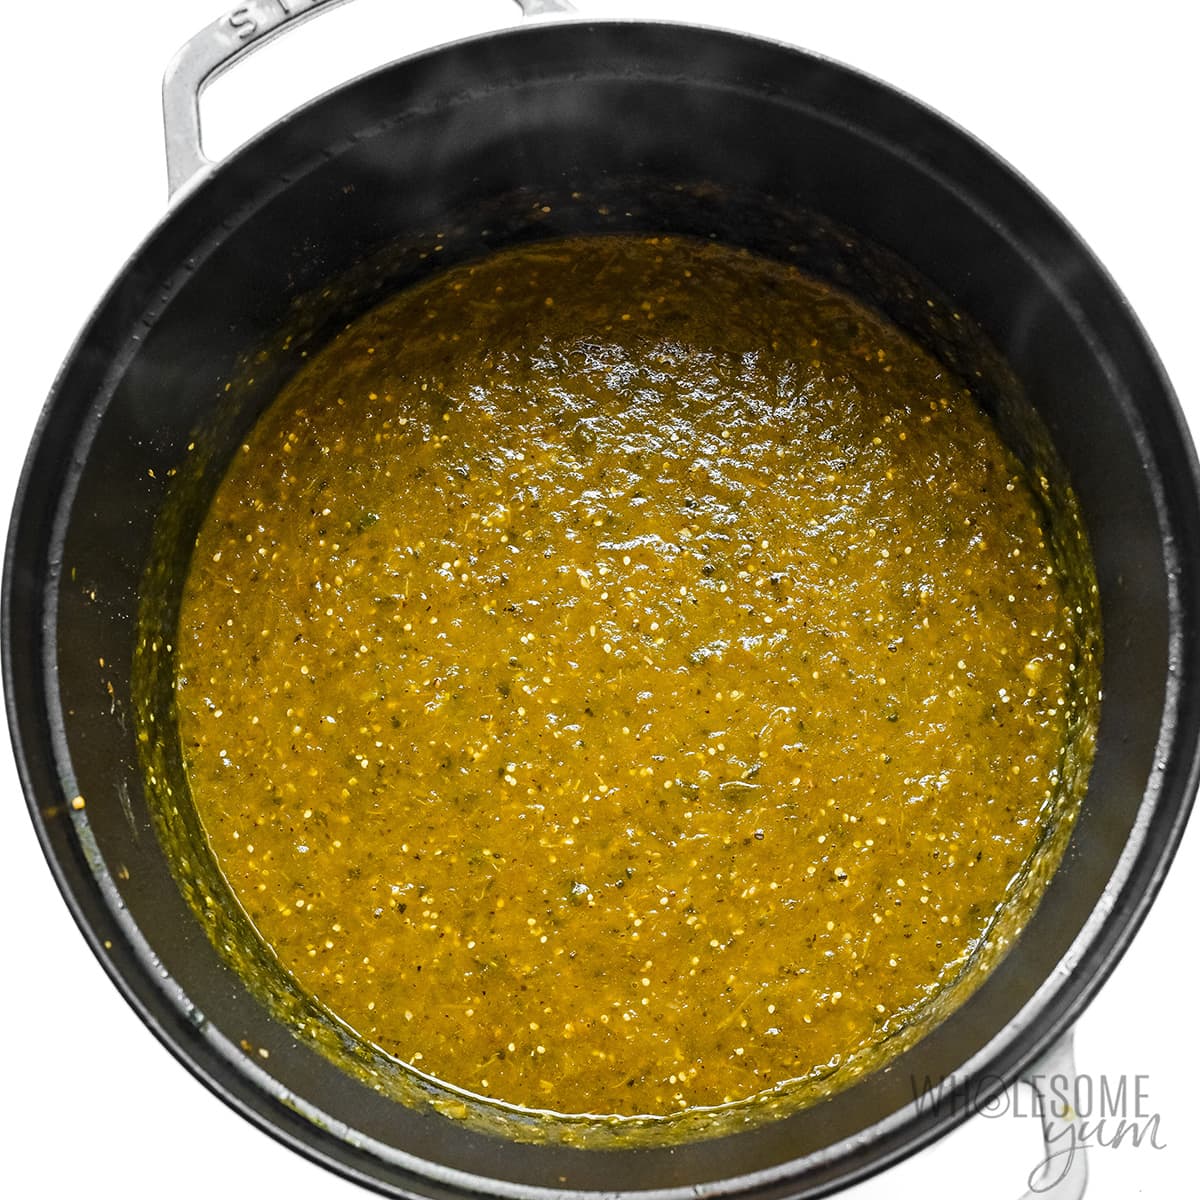 Chile verde sauce in Dutch oven.